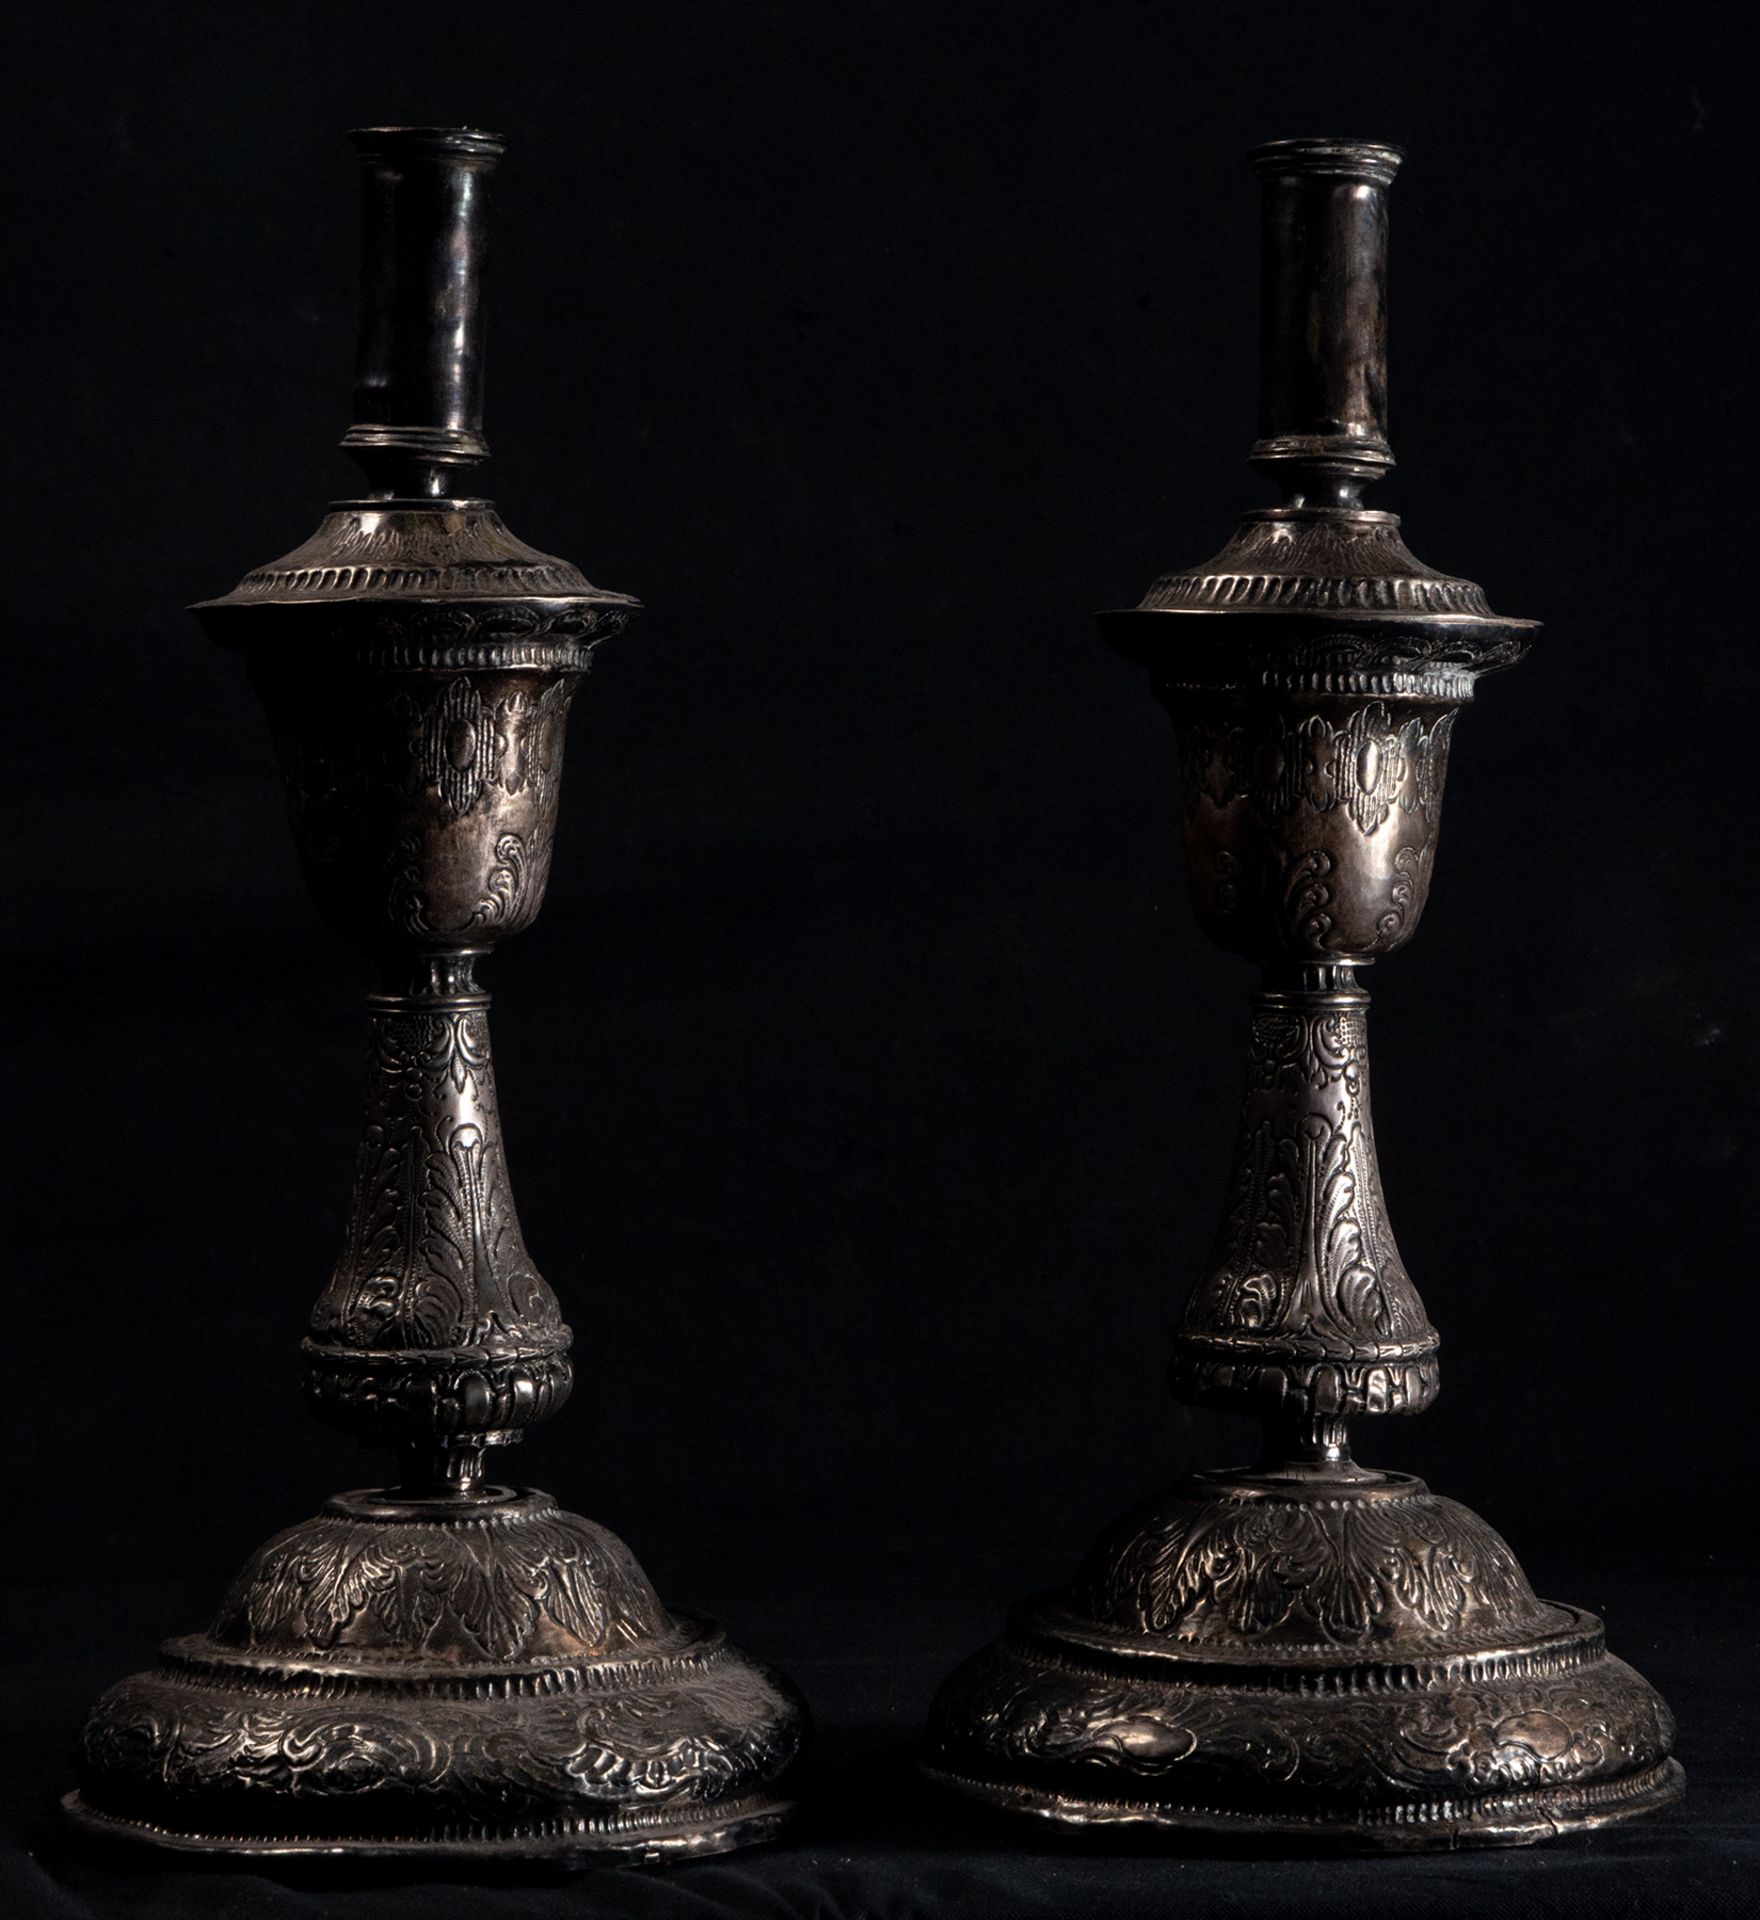 Pair of embossed silver candelabra, colonial Viceregal work from the late 17th century - early 18th 